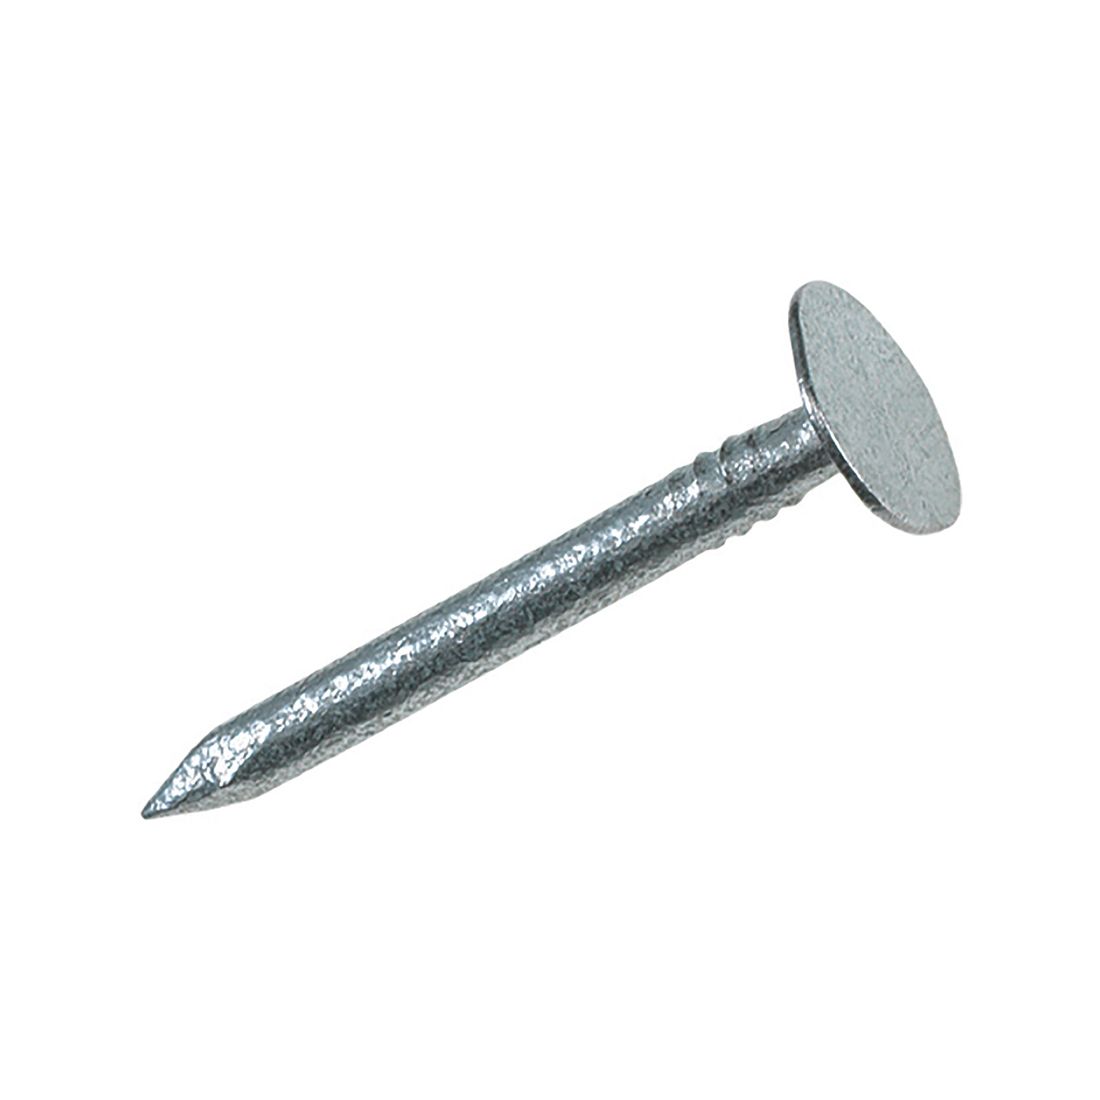 Unifix Galvanised Clout Nail 2.65 X 40Mm 5Kg